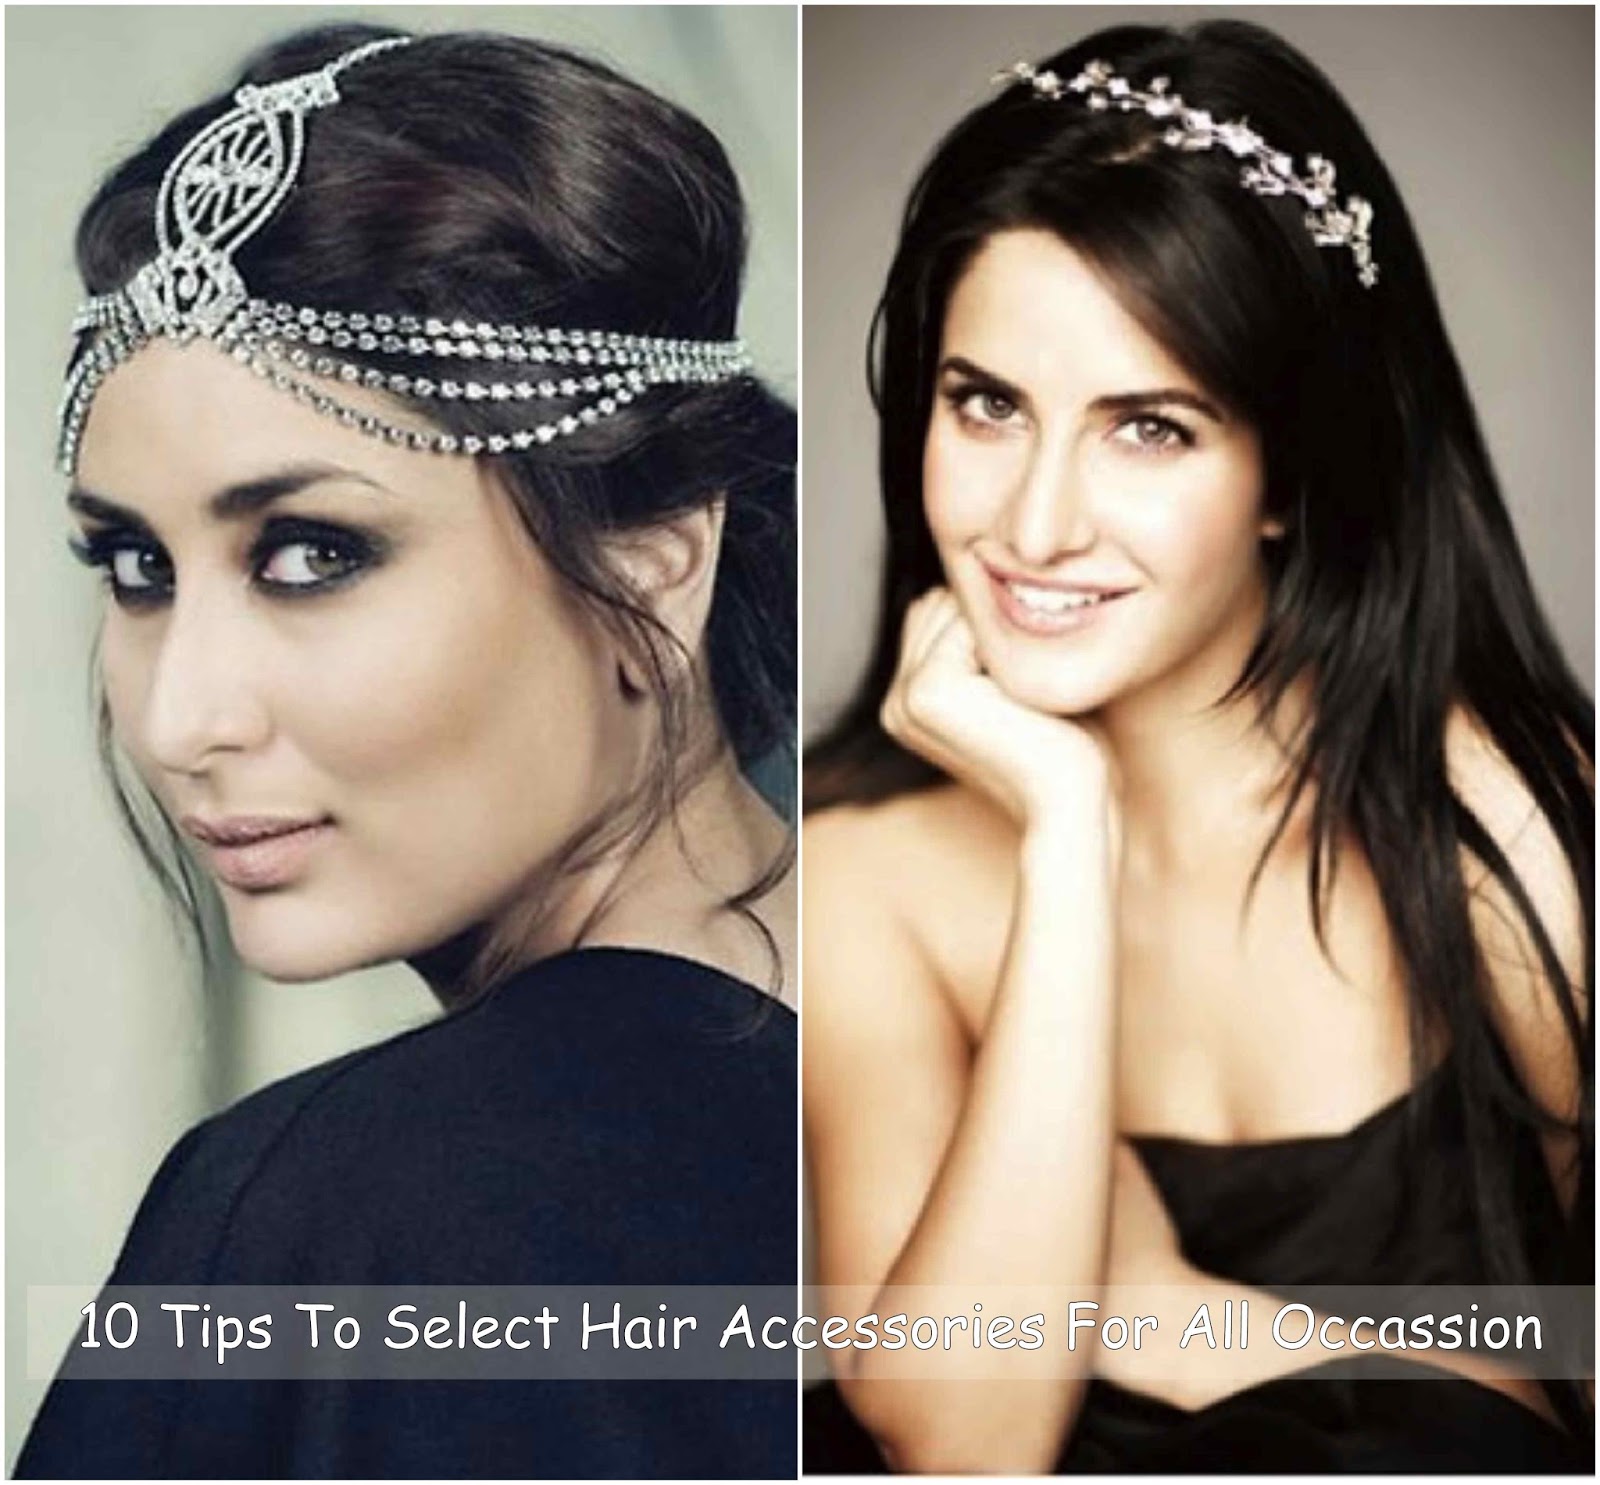 10 Tips To Select Hair Accessories For All Occassions